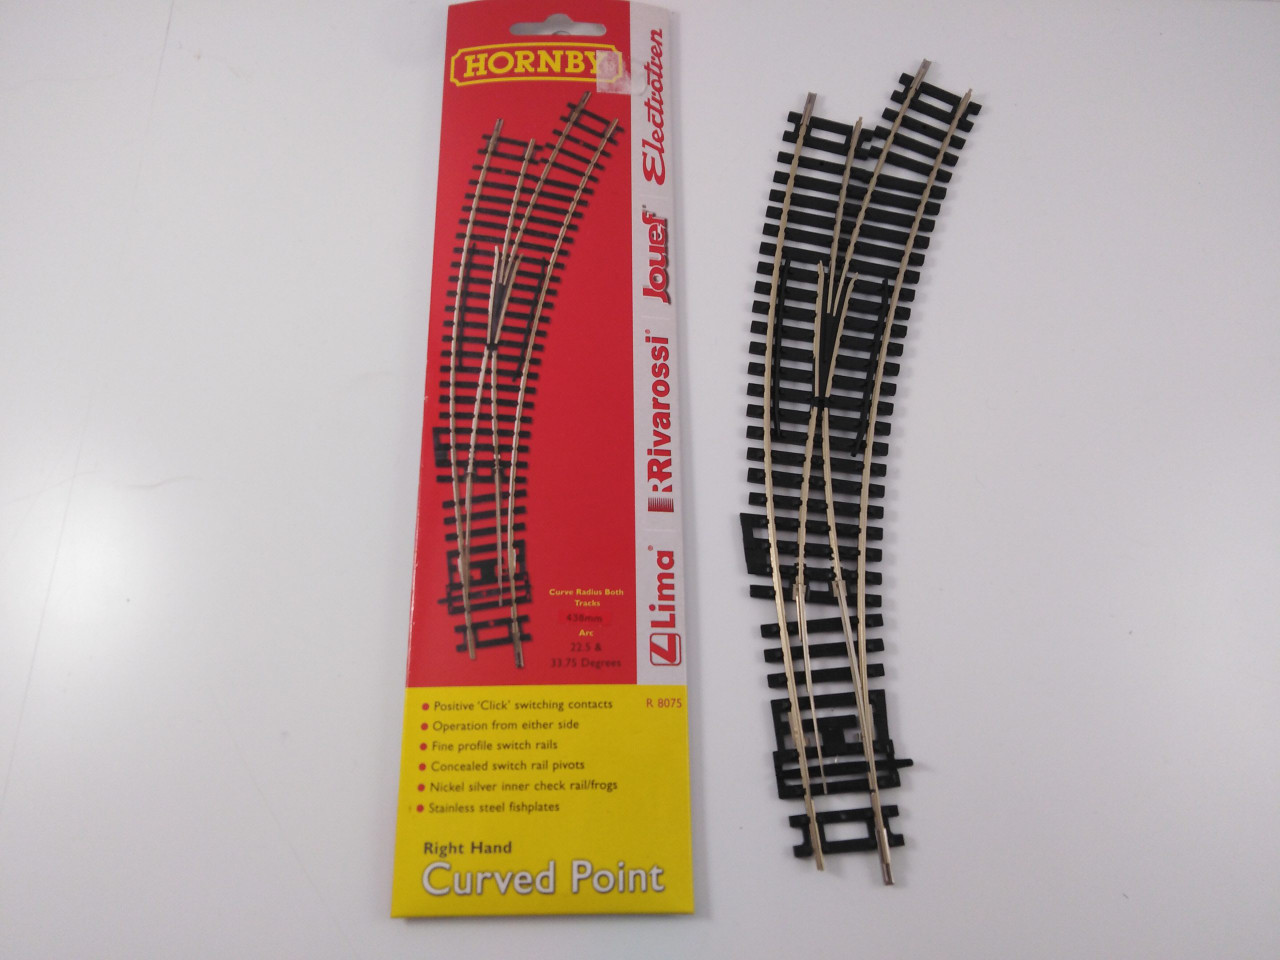 Hornby R8075 Curved Point R/H  Model Railway Accessories